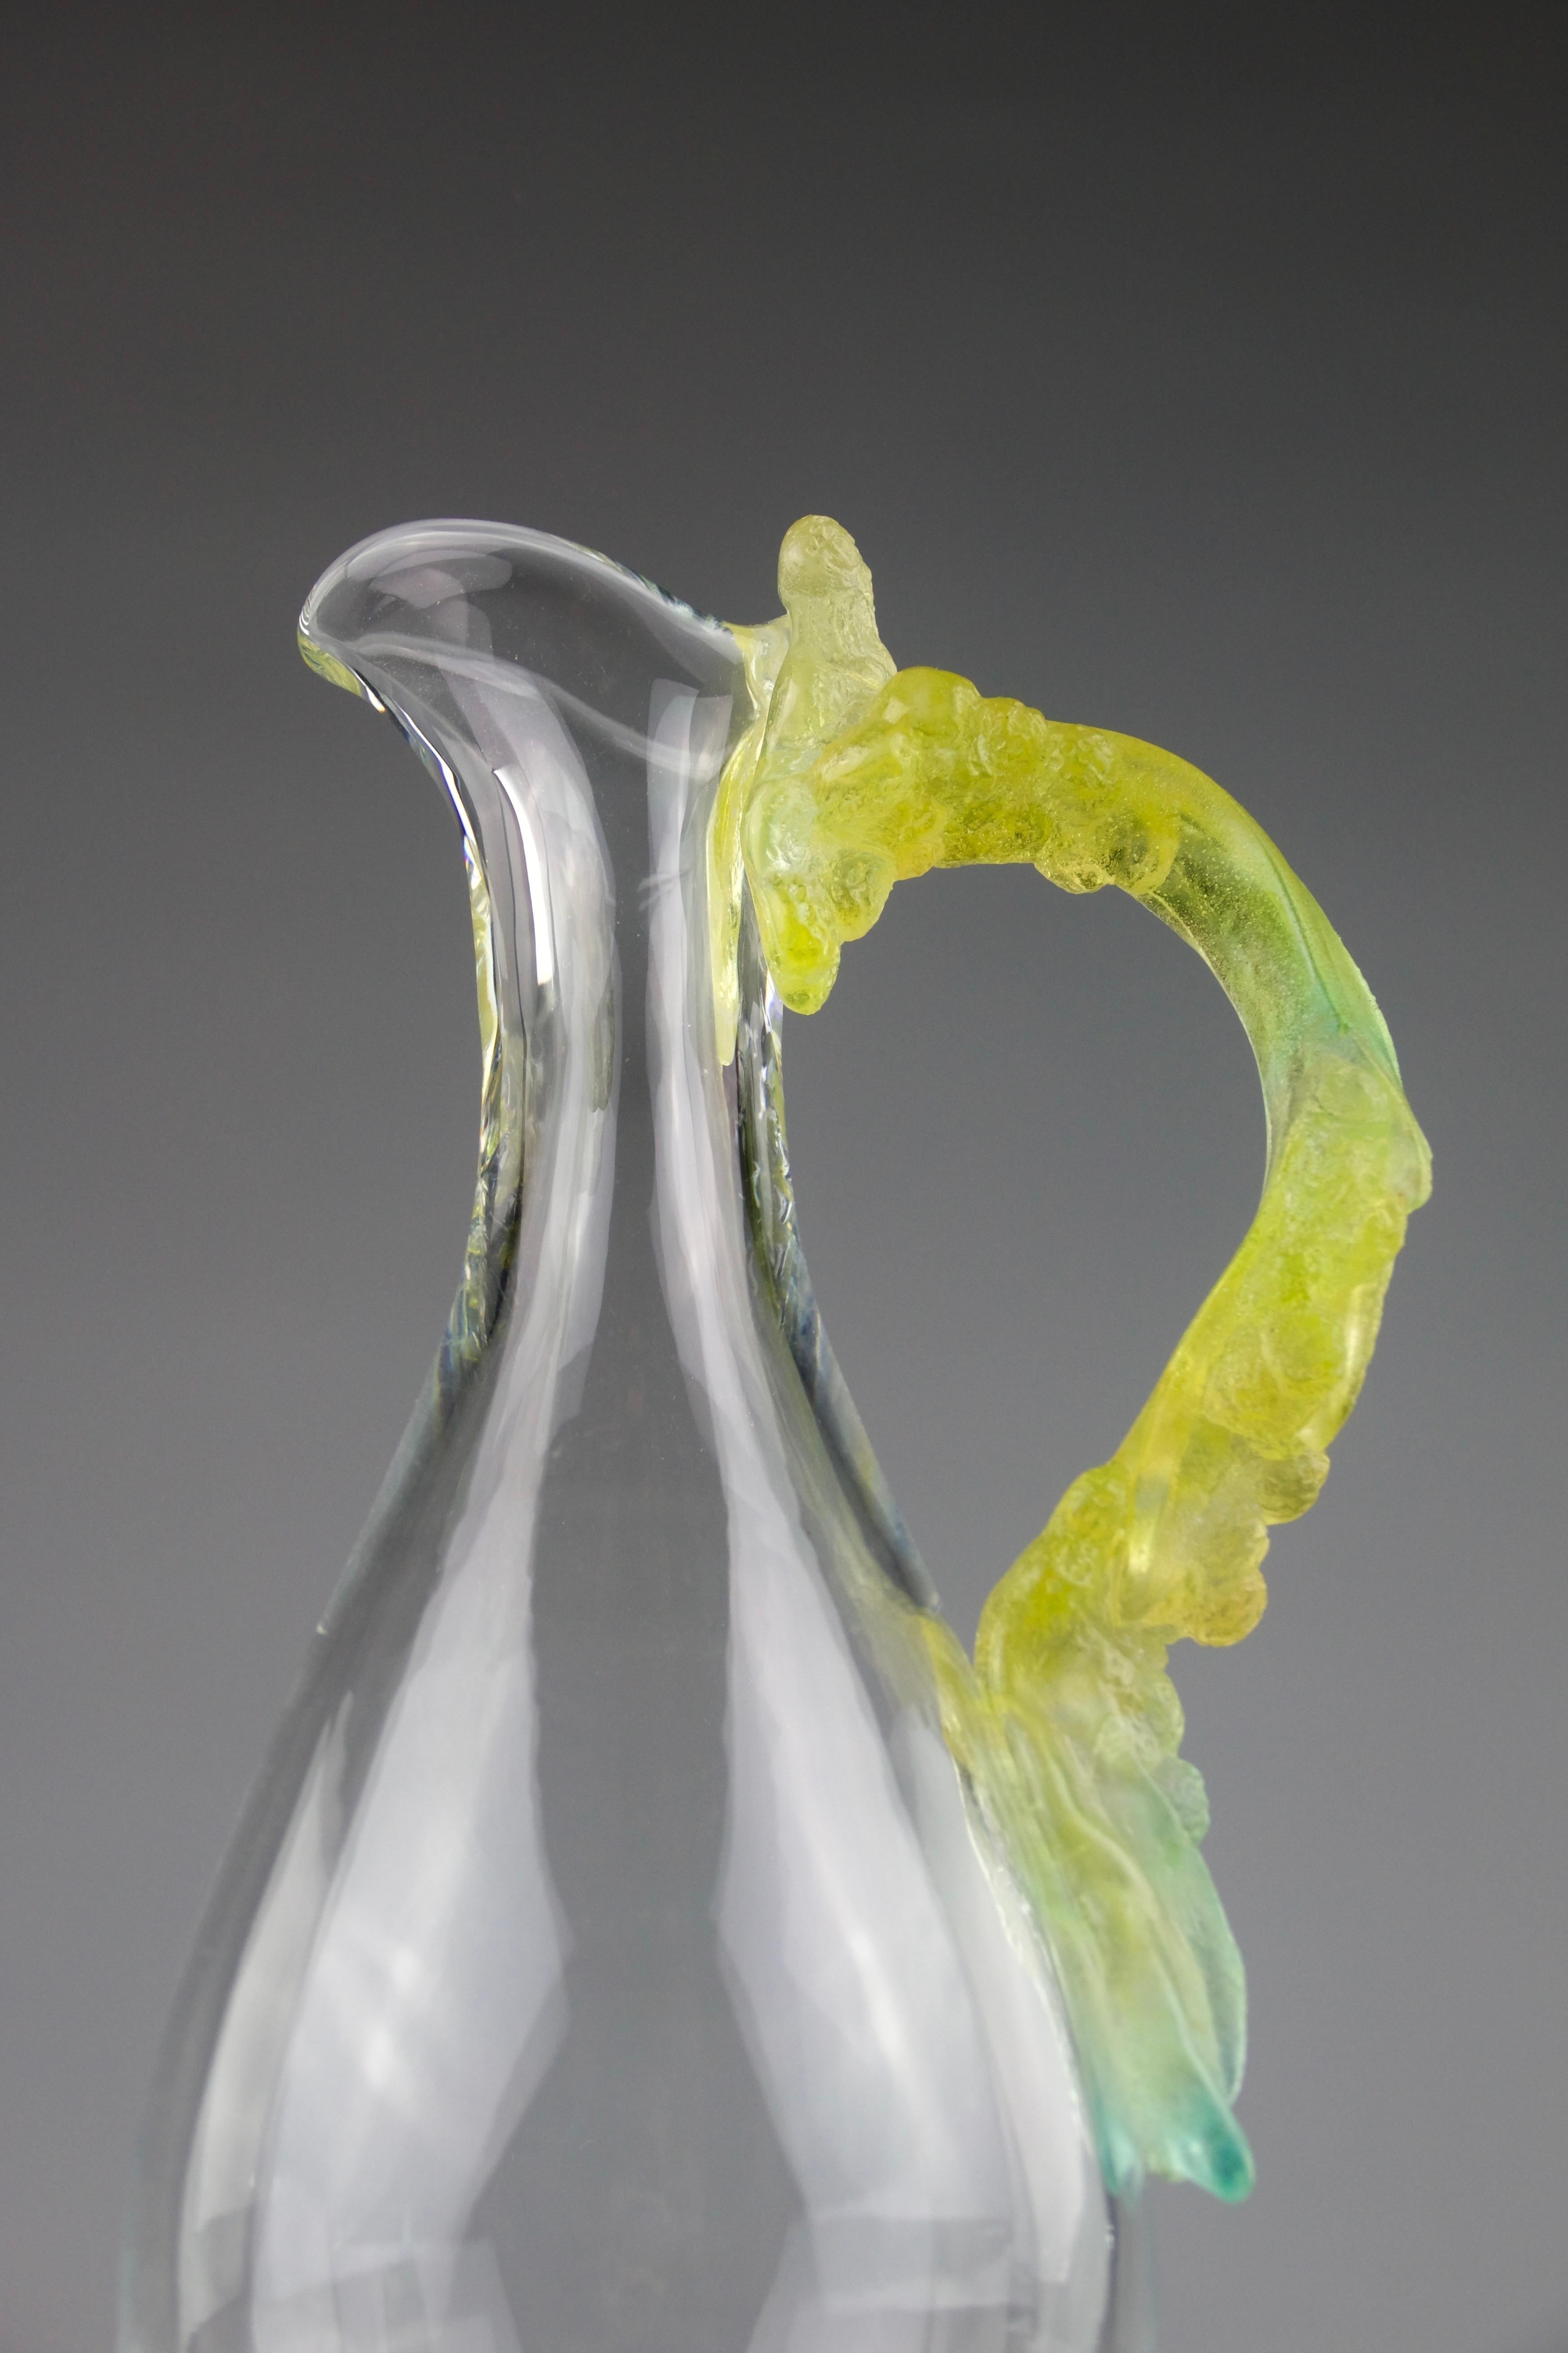 Beautiful Daum France carafe. Handle in glass paste of green and yellow hues and decorations of foliage and berries. Body in Daum Crystal. Signed Daum France.

Very good condition.

Dimensions in cm ( H x L x l ) : 28 x 12 x 9.8

Secure